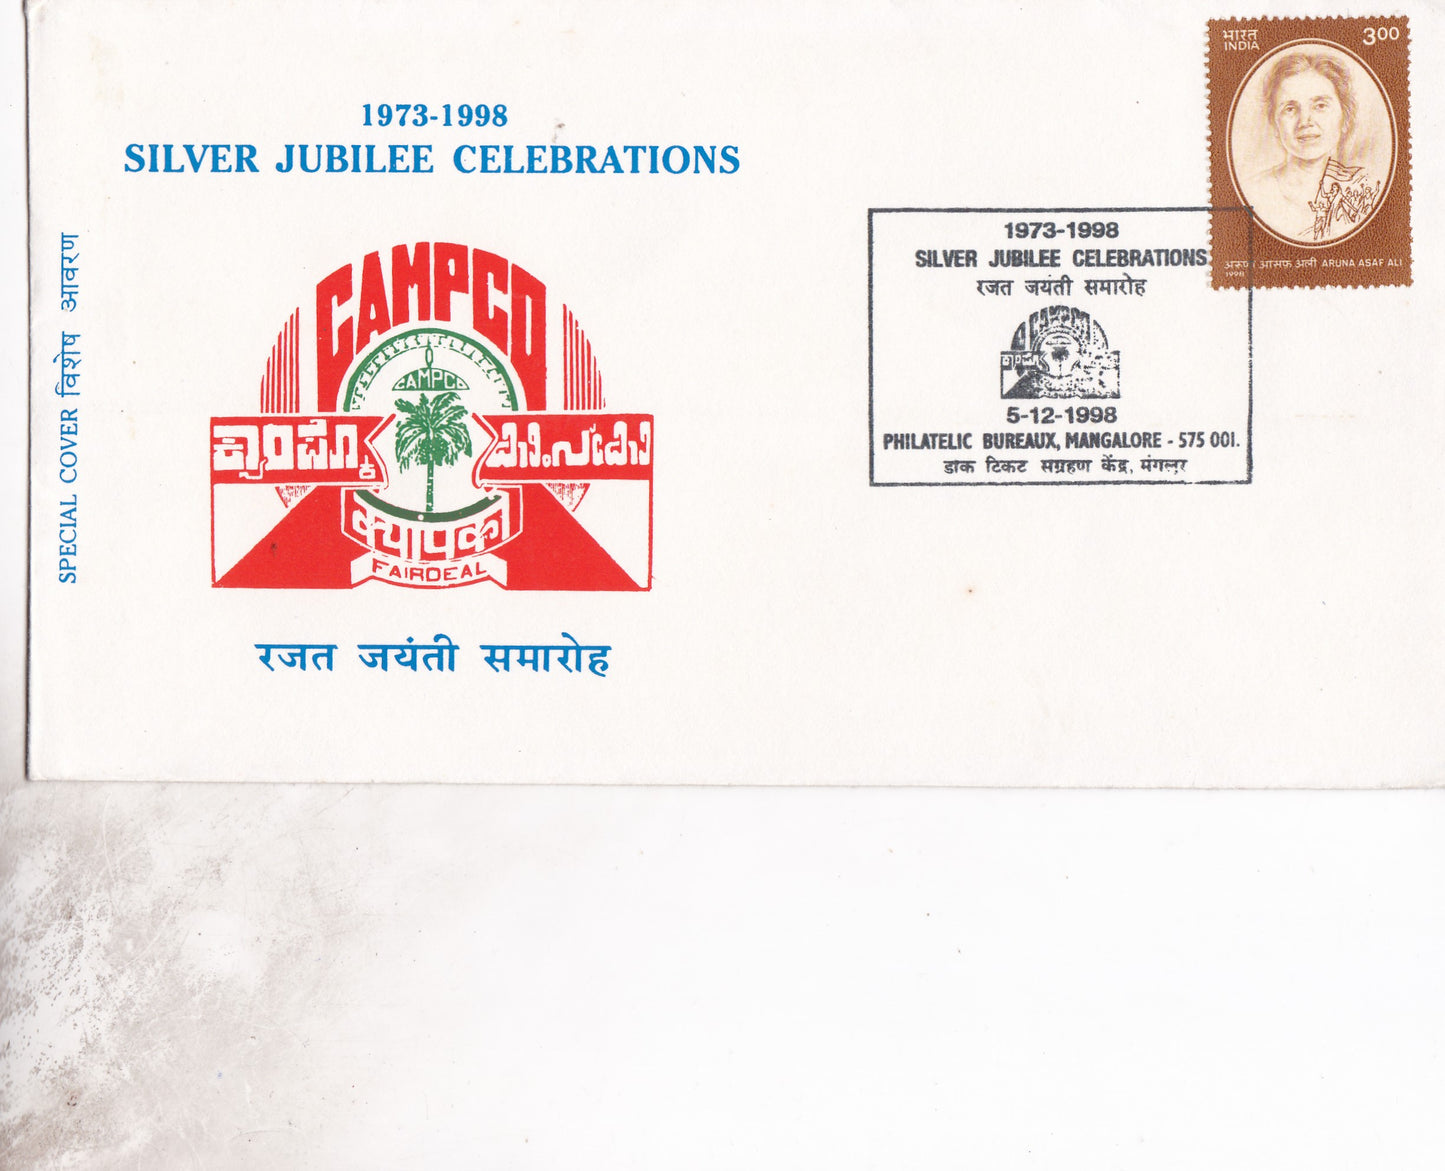 Special Cover on Silver Jubilee Celebrations.